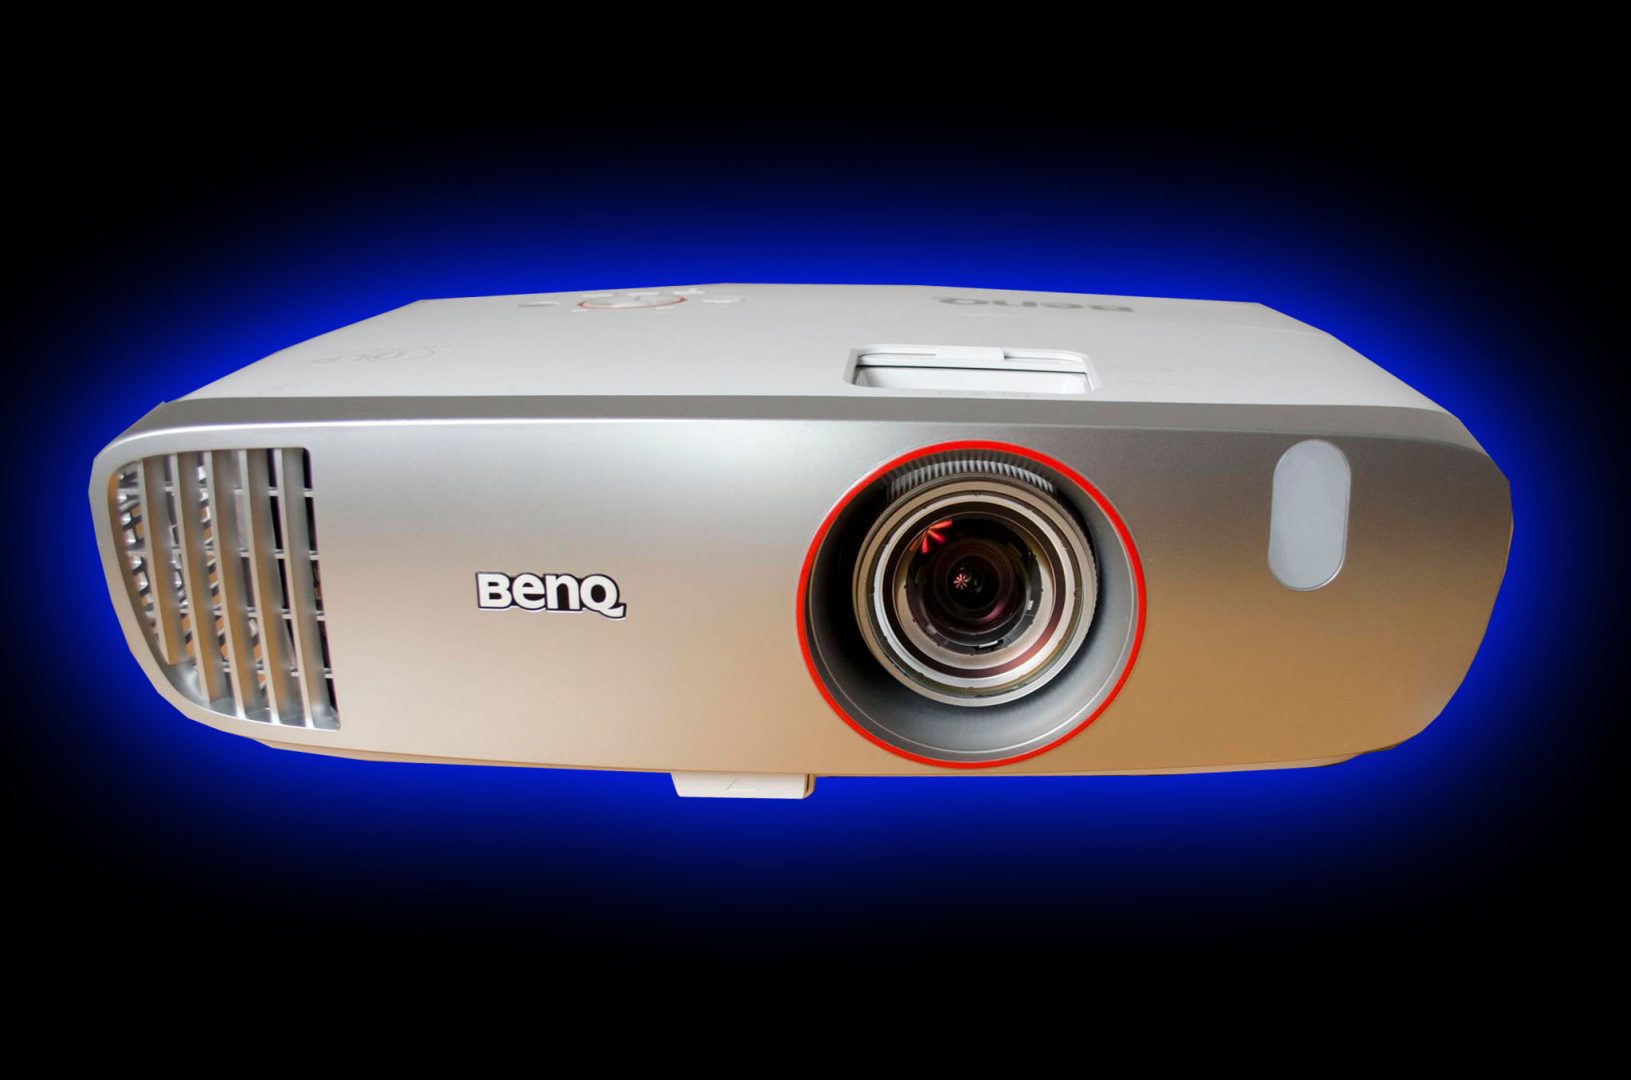 Gaming on the BenQ W1210ST Projector